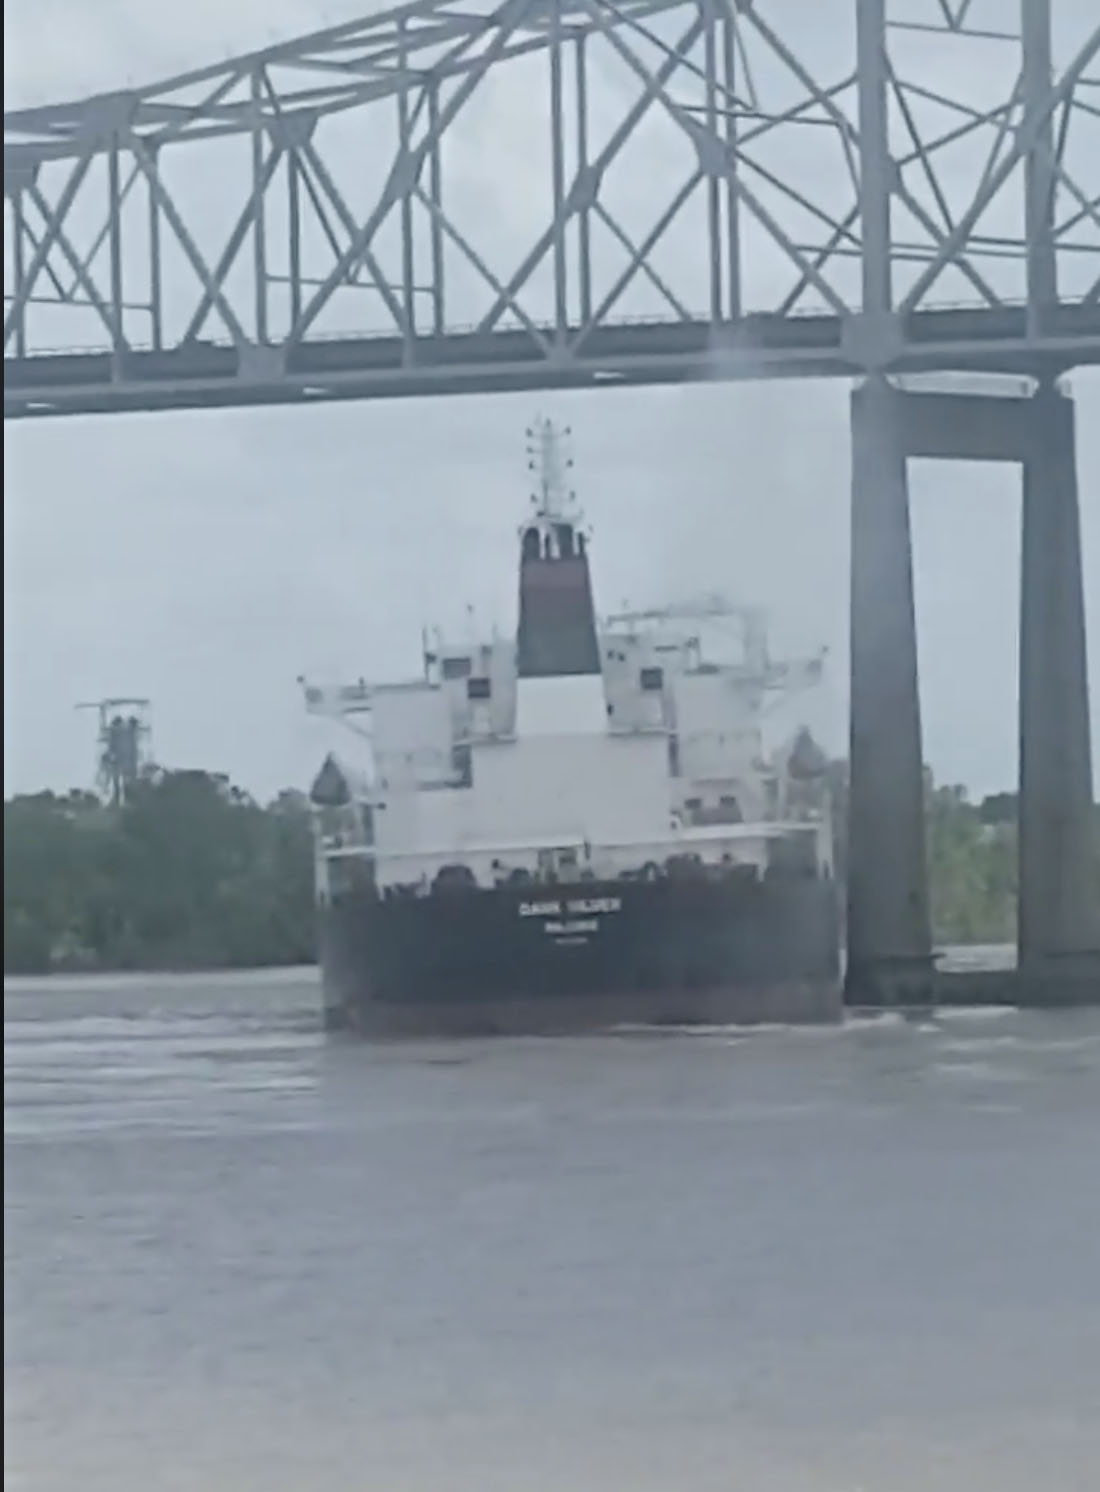 Screen capture from video posted on social media of ship hitting the protective girder of the Sunshine Bridge.